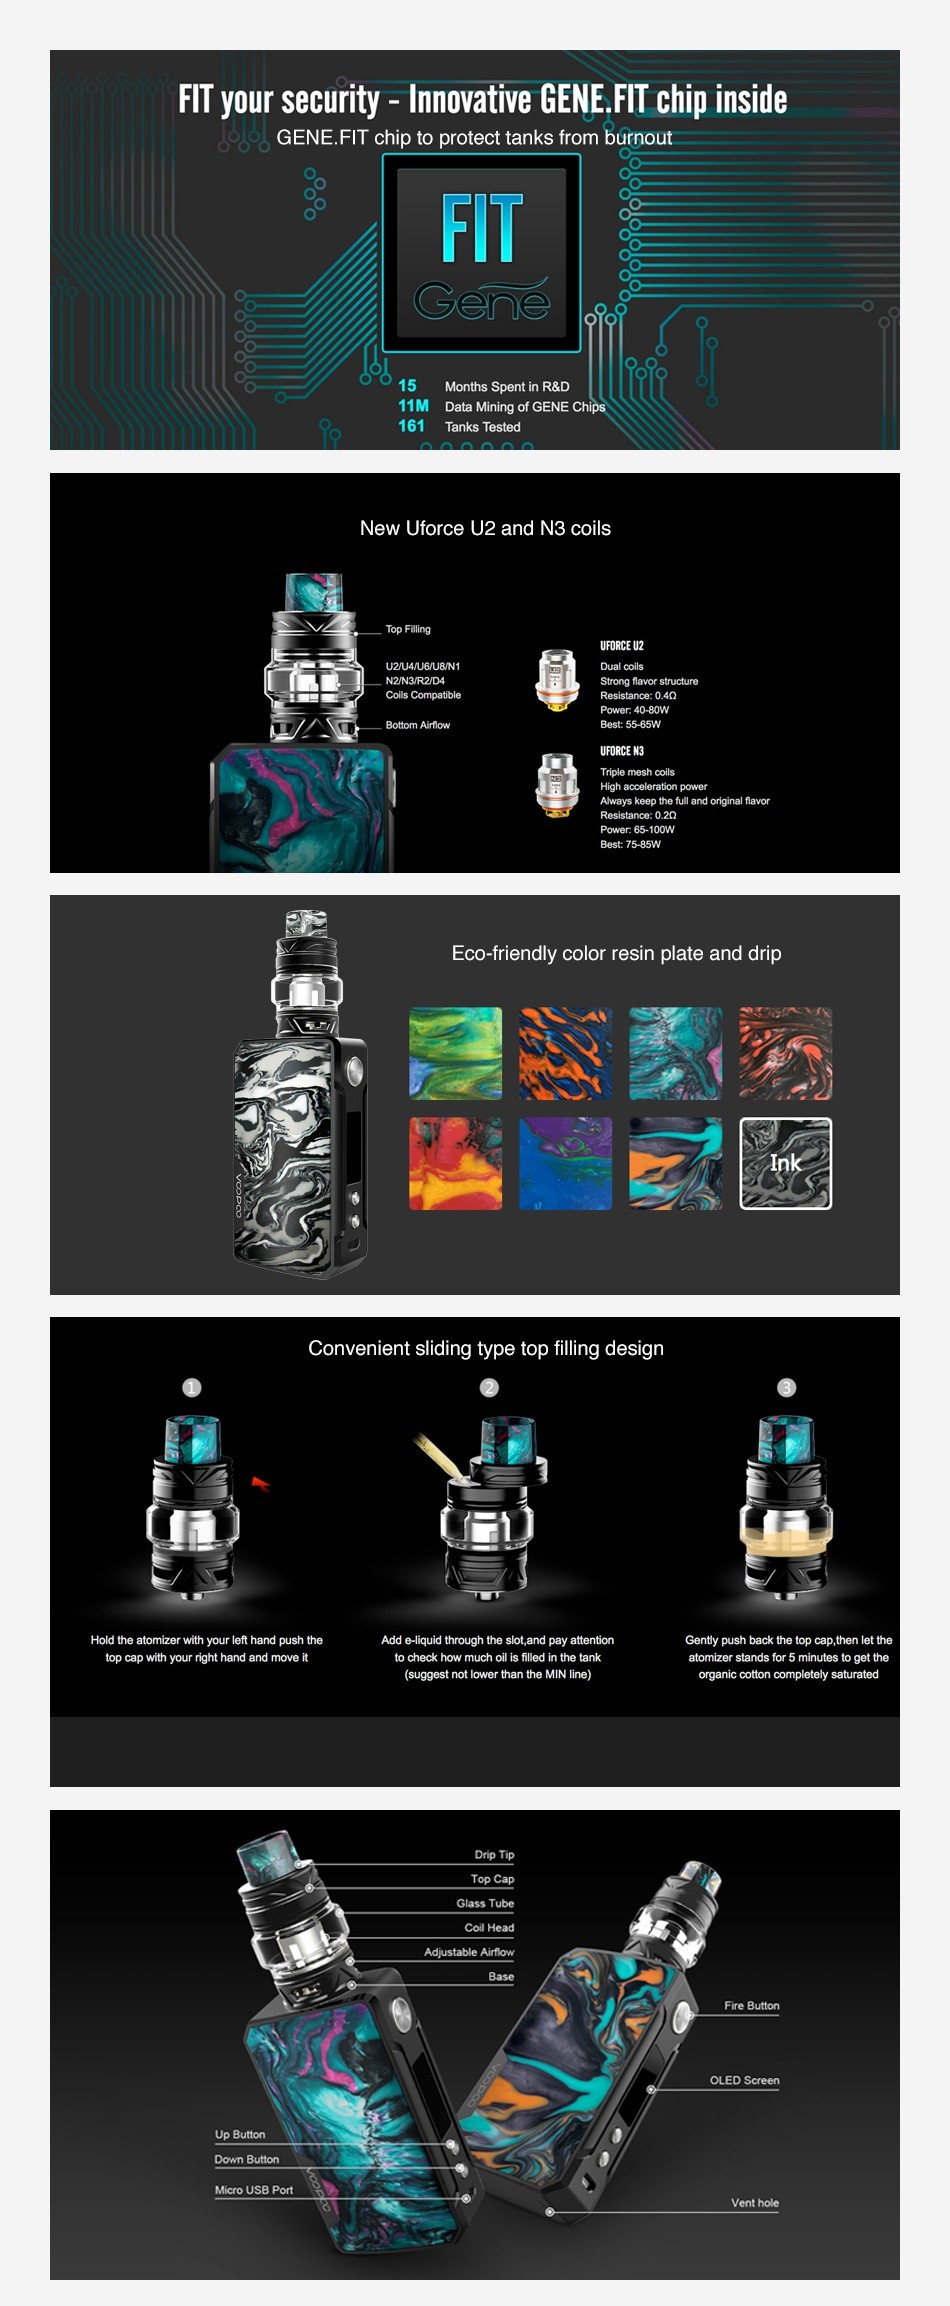 VOOPOO Drag 2 177W TC Kit with UFORCE T2 FIT your security  Innovative GENE FIT chip inside loo GENE FIT chip to protect tanks from burnout FIT 15 Months Spent in R D ata Mining of GENE Chips 161 Tanks Tested New force u2 and n3 coils UFORCE UZ Dual coils Powor  85 100W Eco friendly color resin plate and drip Convenient sliding type top filling design top cap with your nght hand anc move it to check how much oil is tiled n tre tank atomizer stands for 5 minutes uggest not lower than the MIN Ine  organic cotton completely satureted Drp TIp Fire Butter OLED Sereen Down Button Vent hole